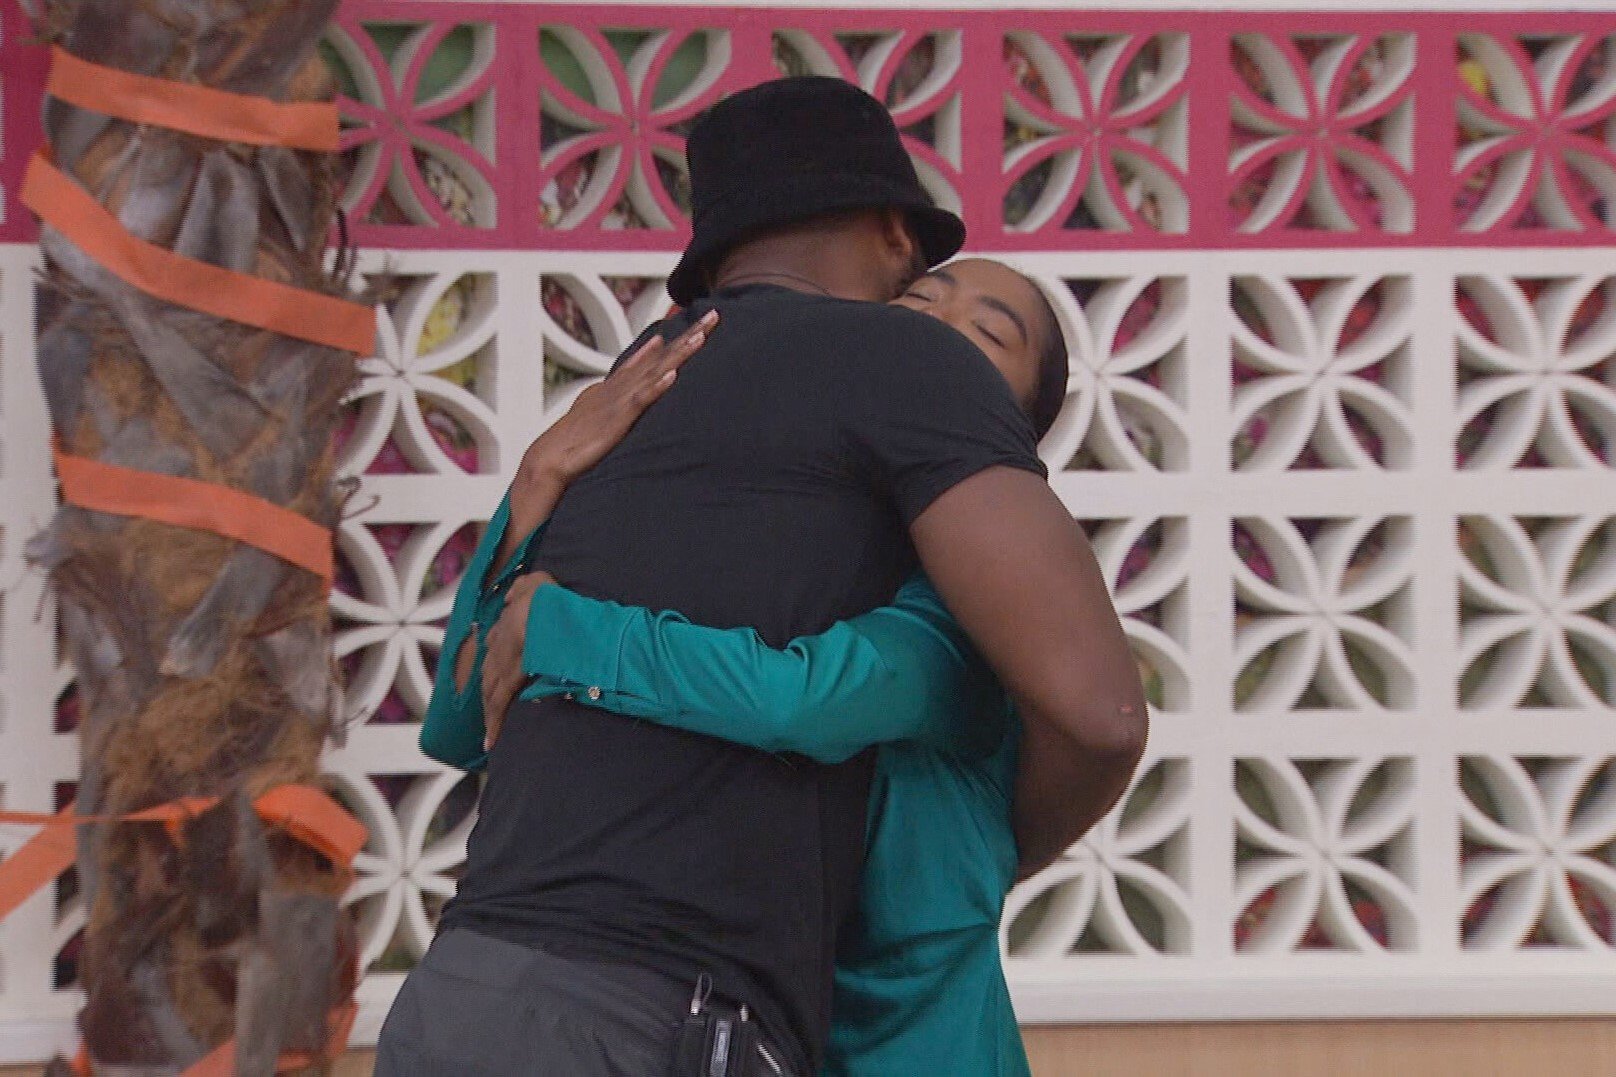 Monte Taylor and Taylor Hale, who star in 'Big Brother 24' on CBS, hug.